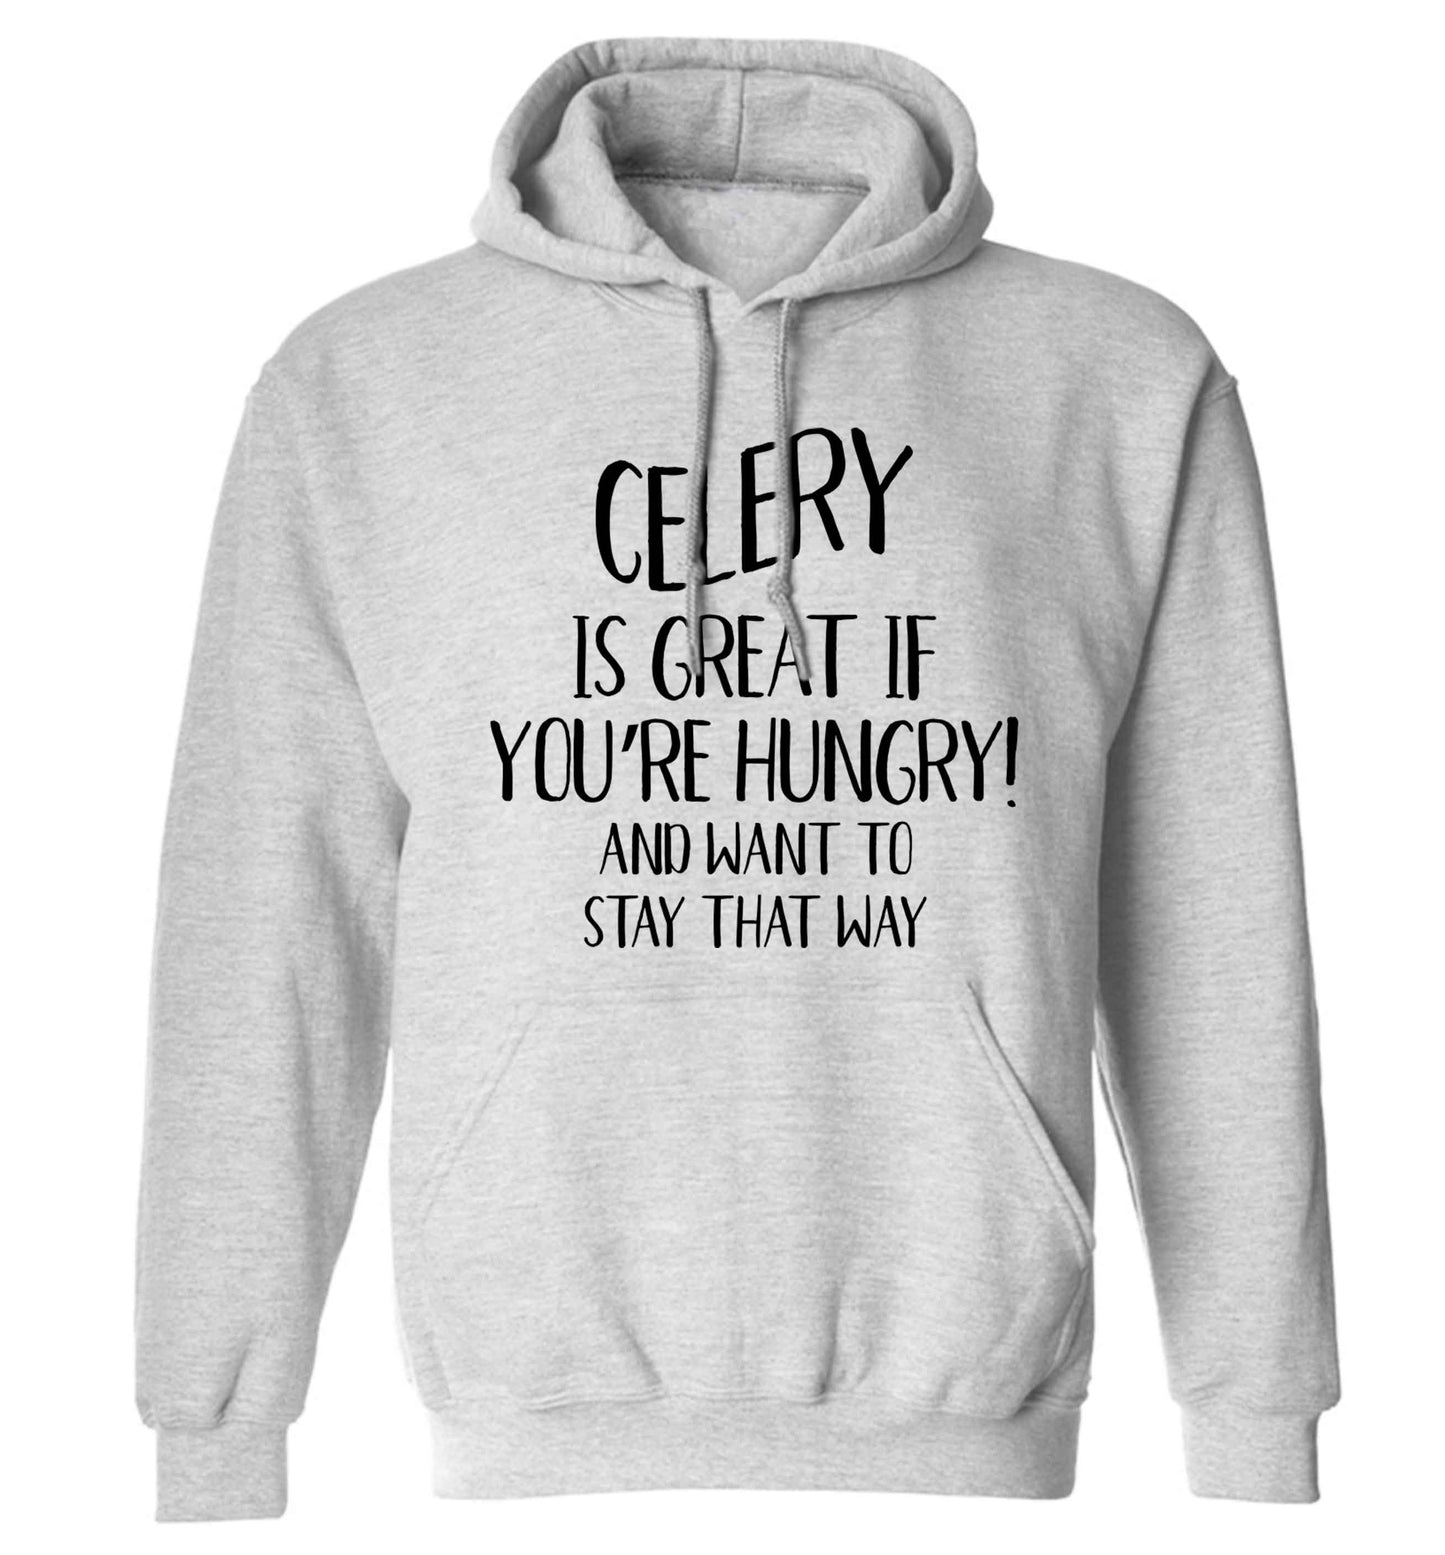 Cellery is great when you're hungry and want to stay that way adults unisex grey hoodie 2XL